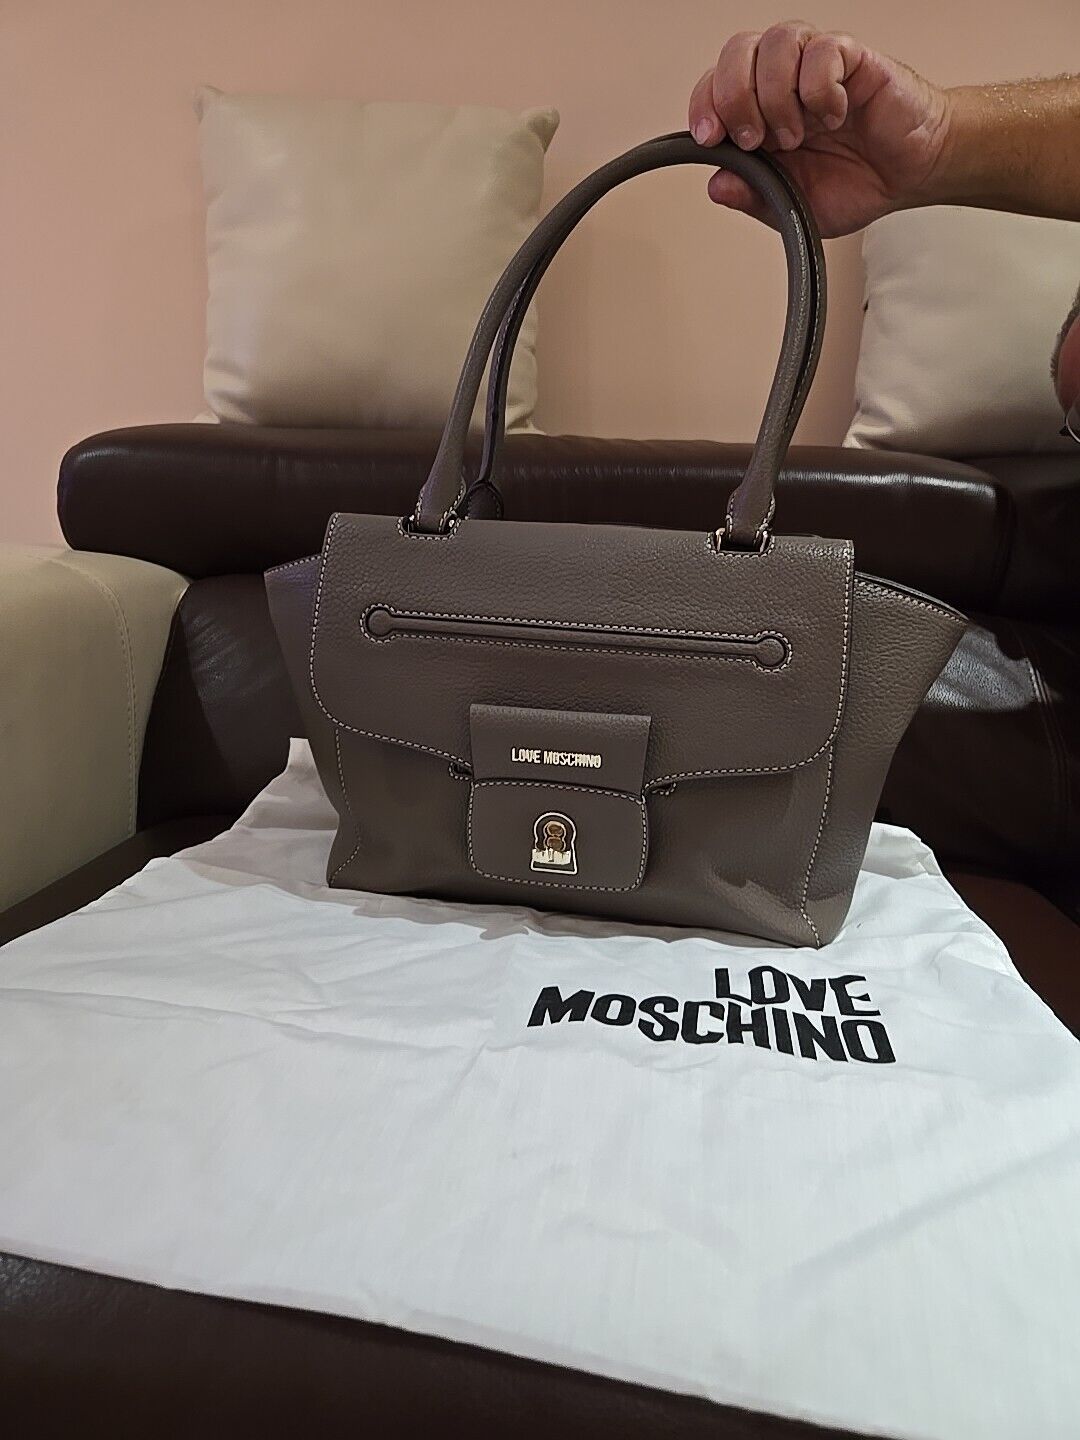 Love Moschino Gray Shoulder Bag Tote Large Gray with duster Red Lining Very Nice